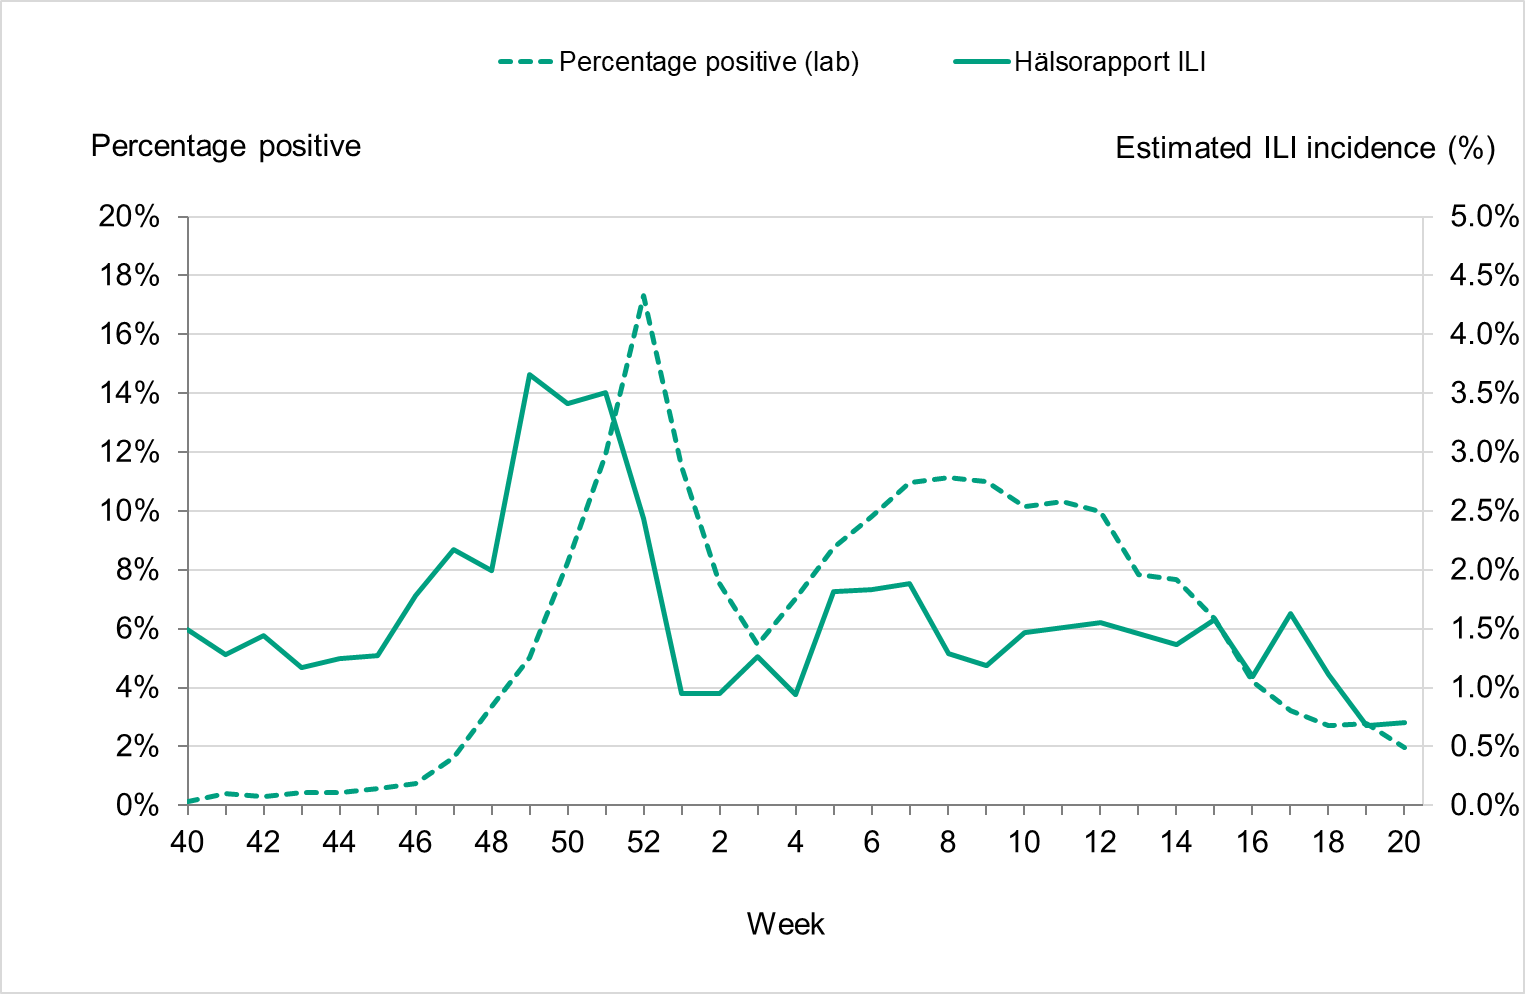 Hälsorapport ILI is at between one and 2 percent durign most of the season, with a peak in week 49 to 51, when COVID-19, influenza and RSV were circulating widely.